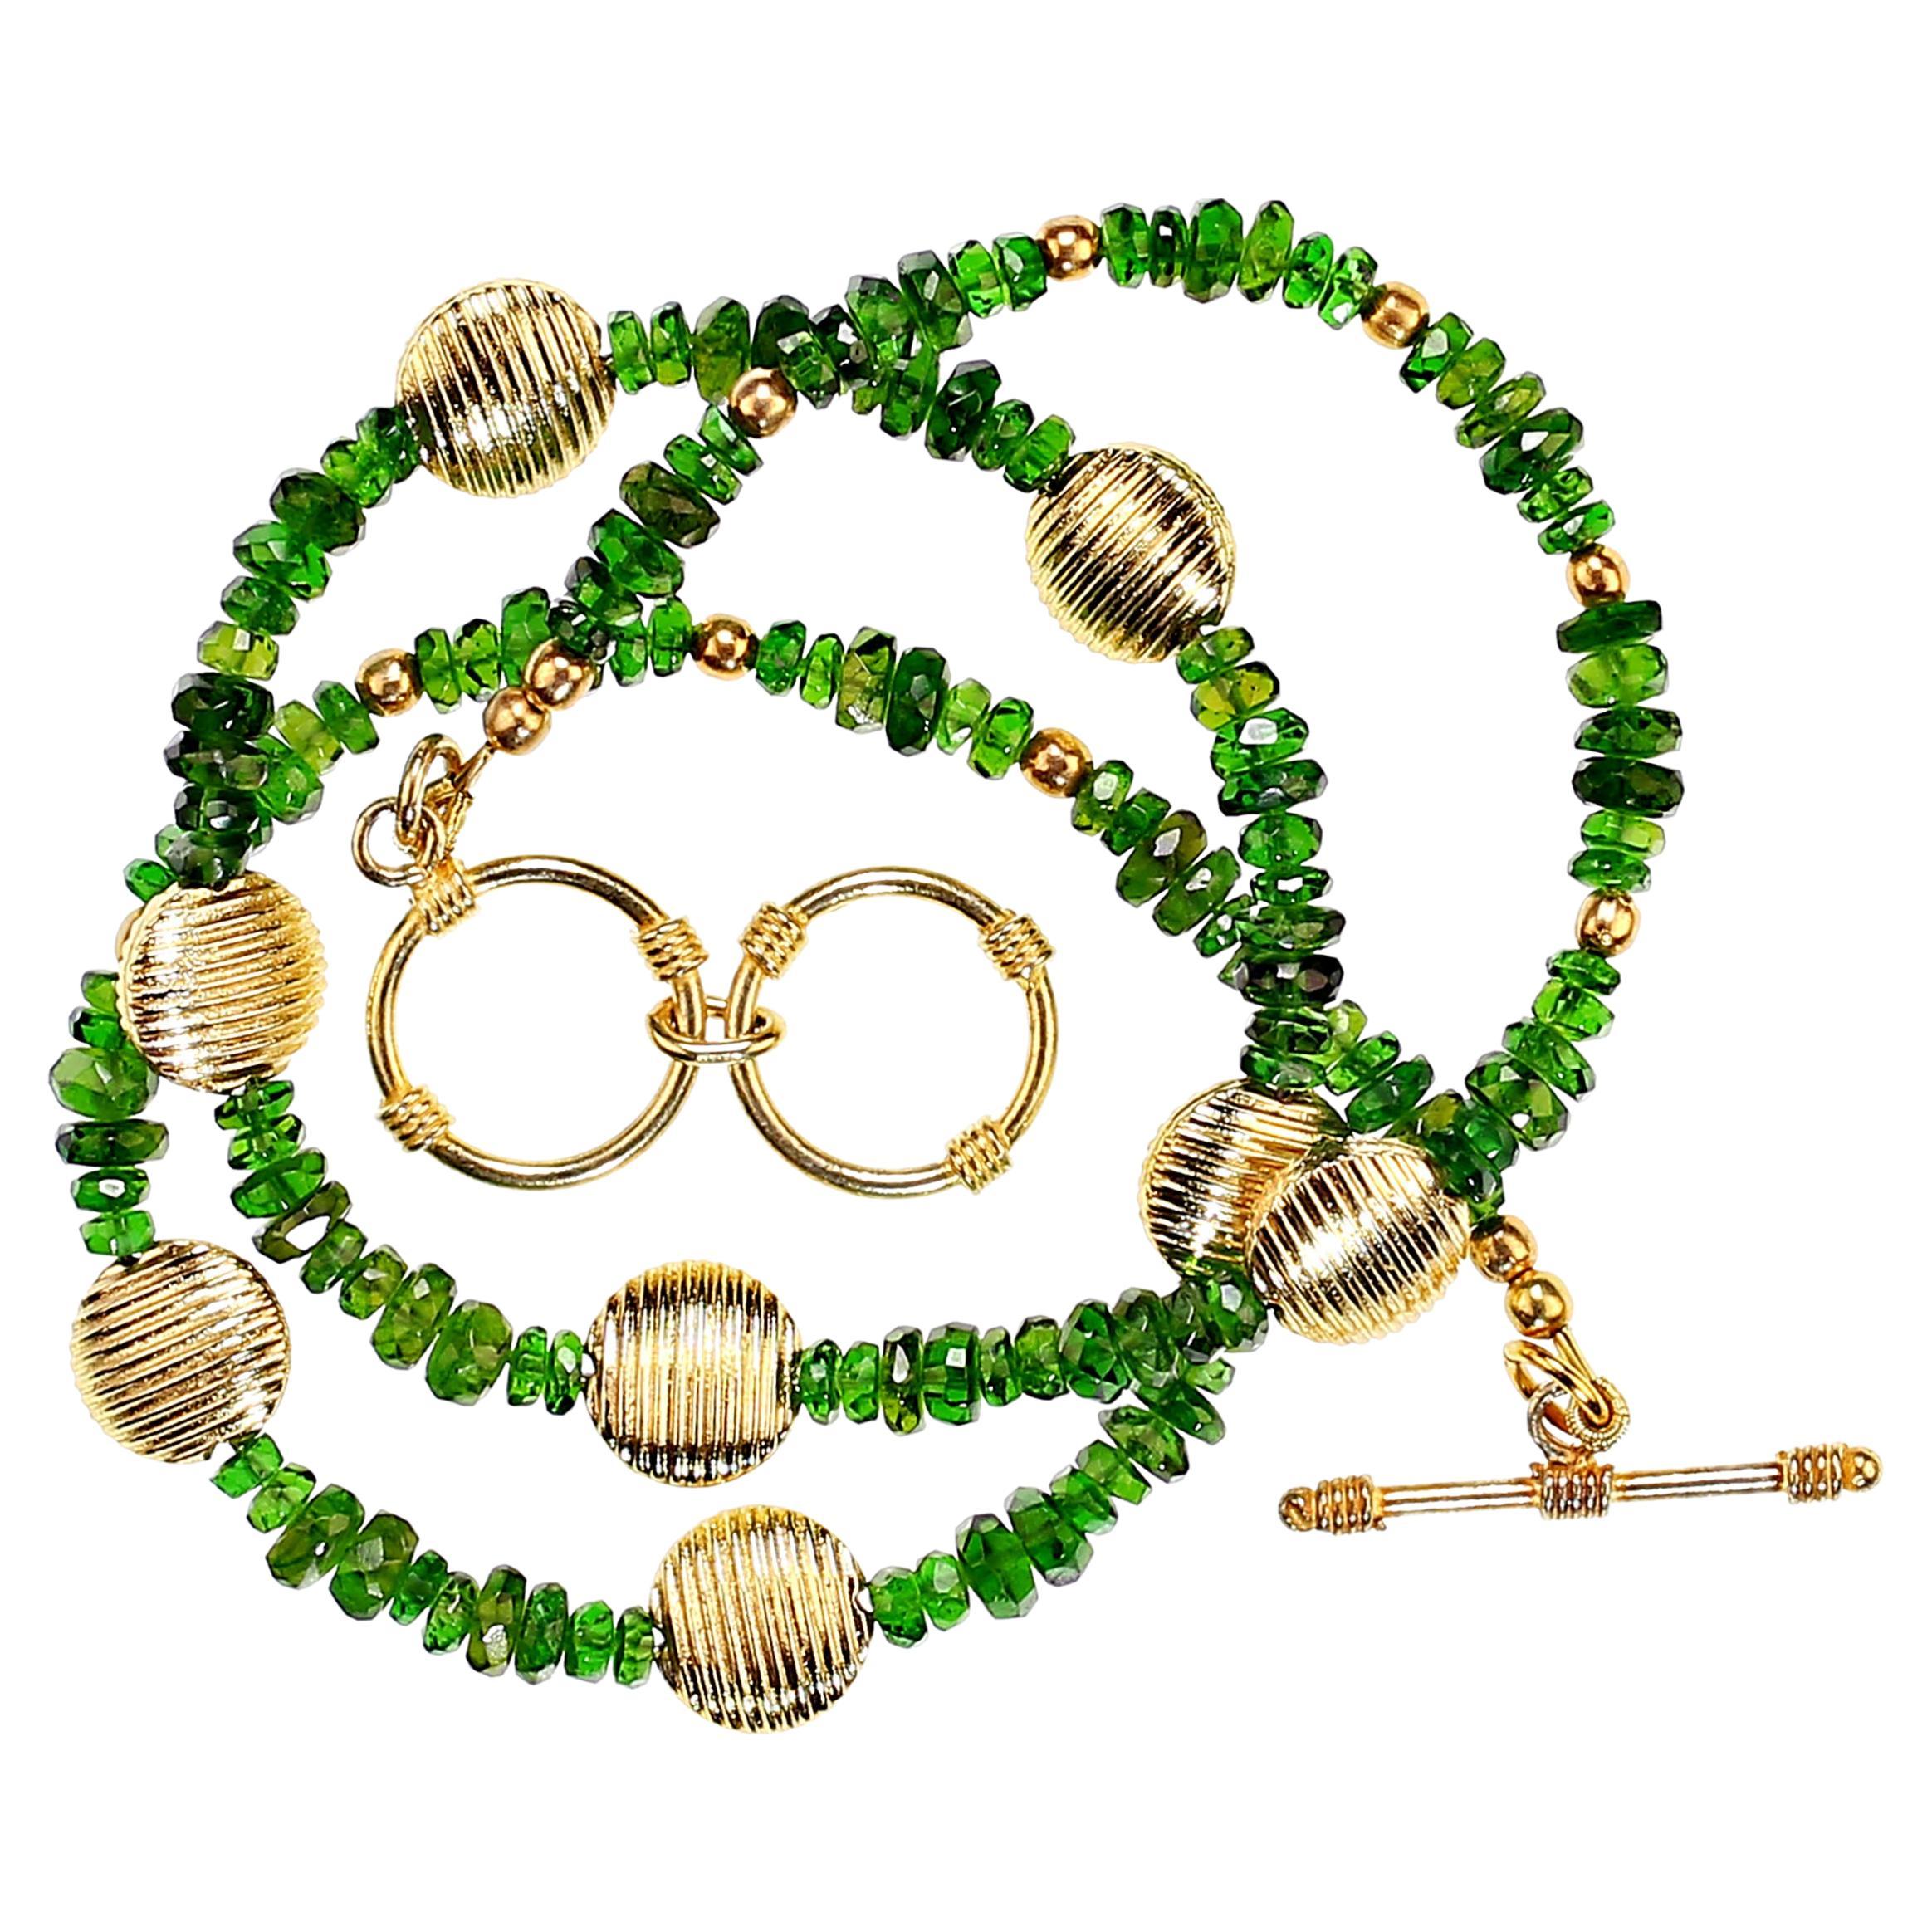 AJD Delicate Green Chrome Diopside and Goldy Accents Necklace  Great Gift!